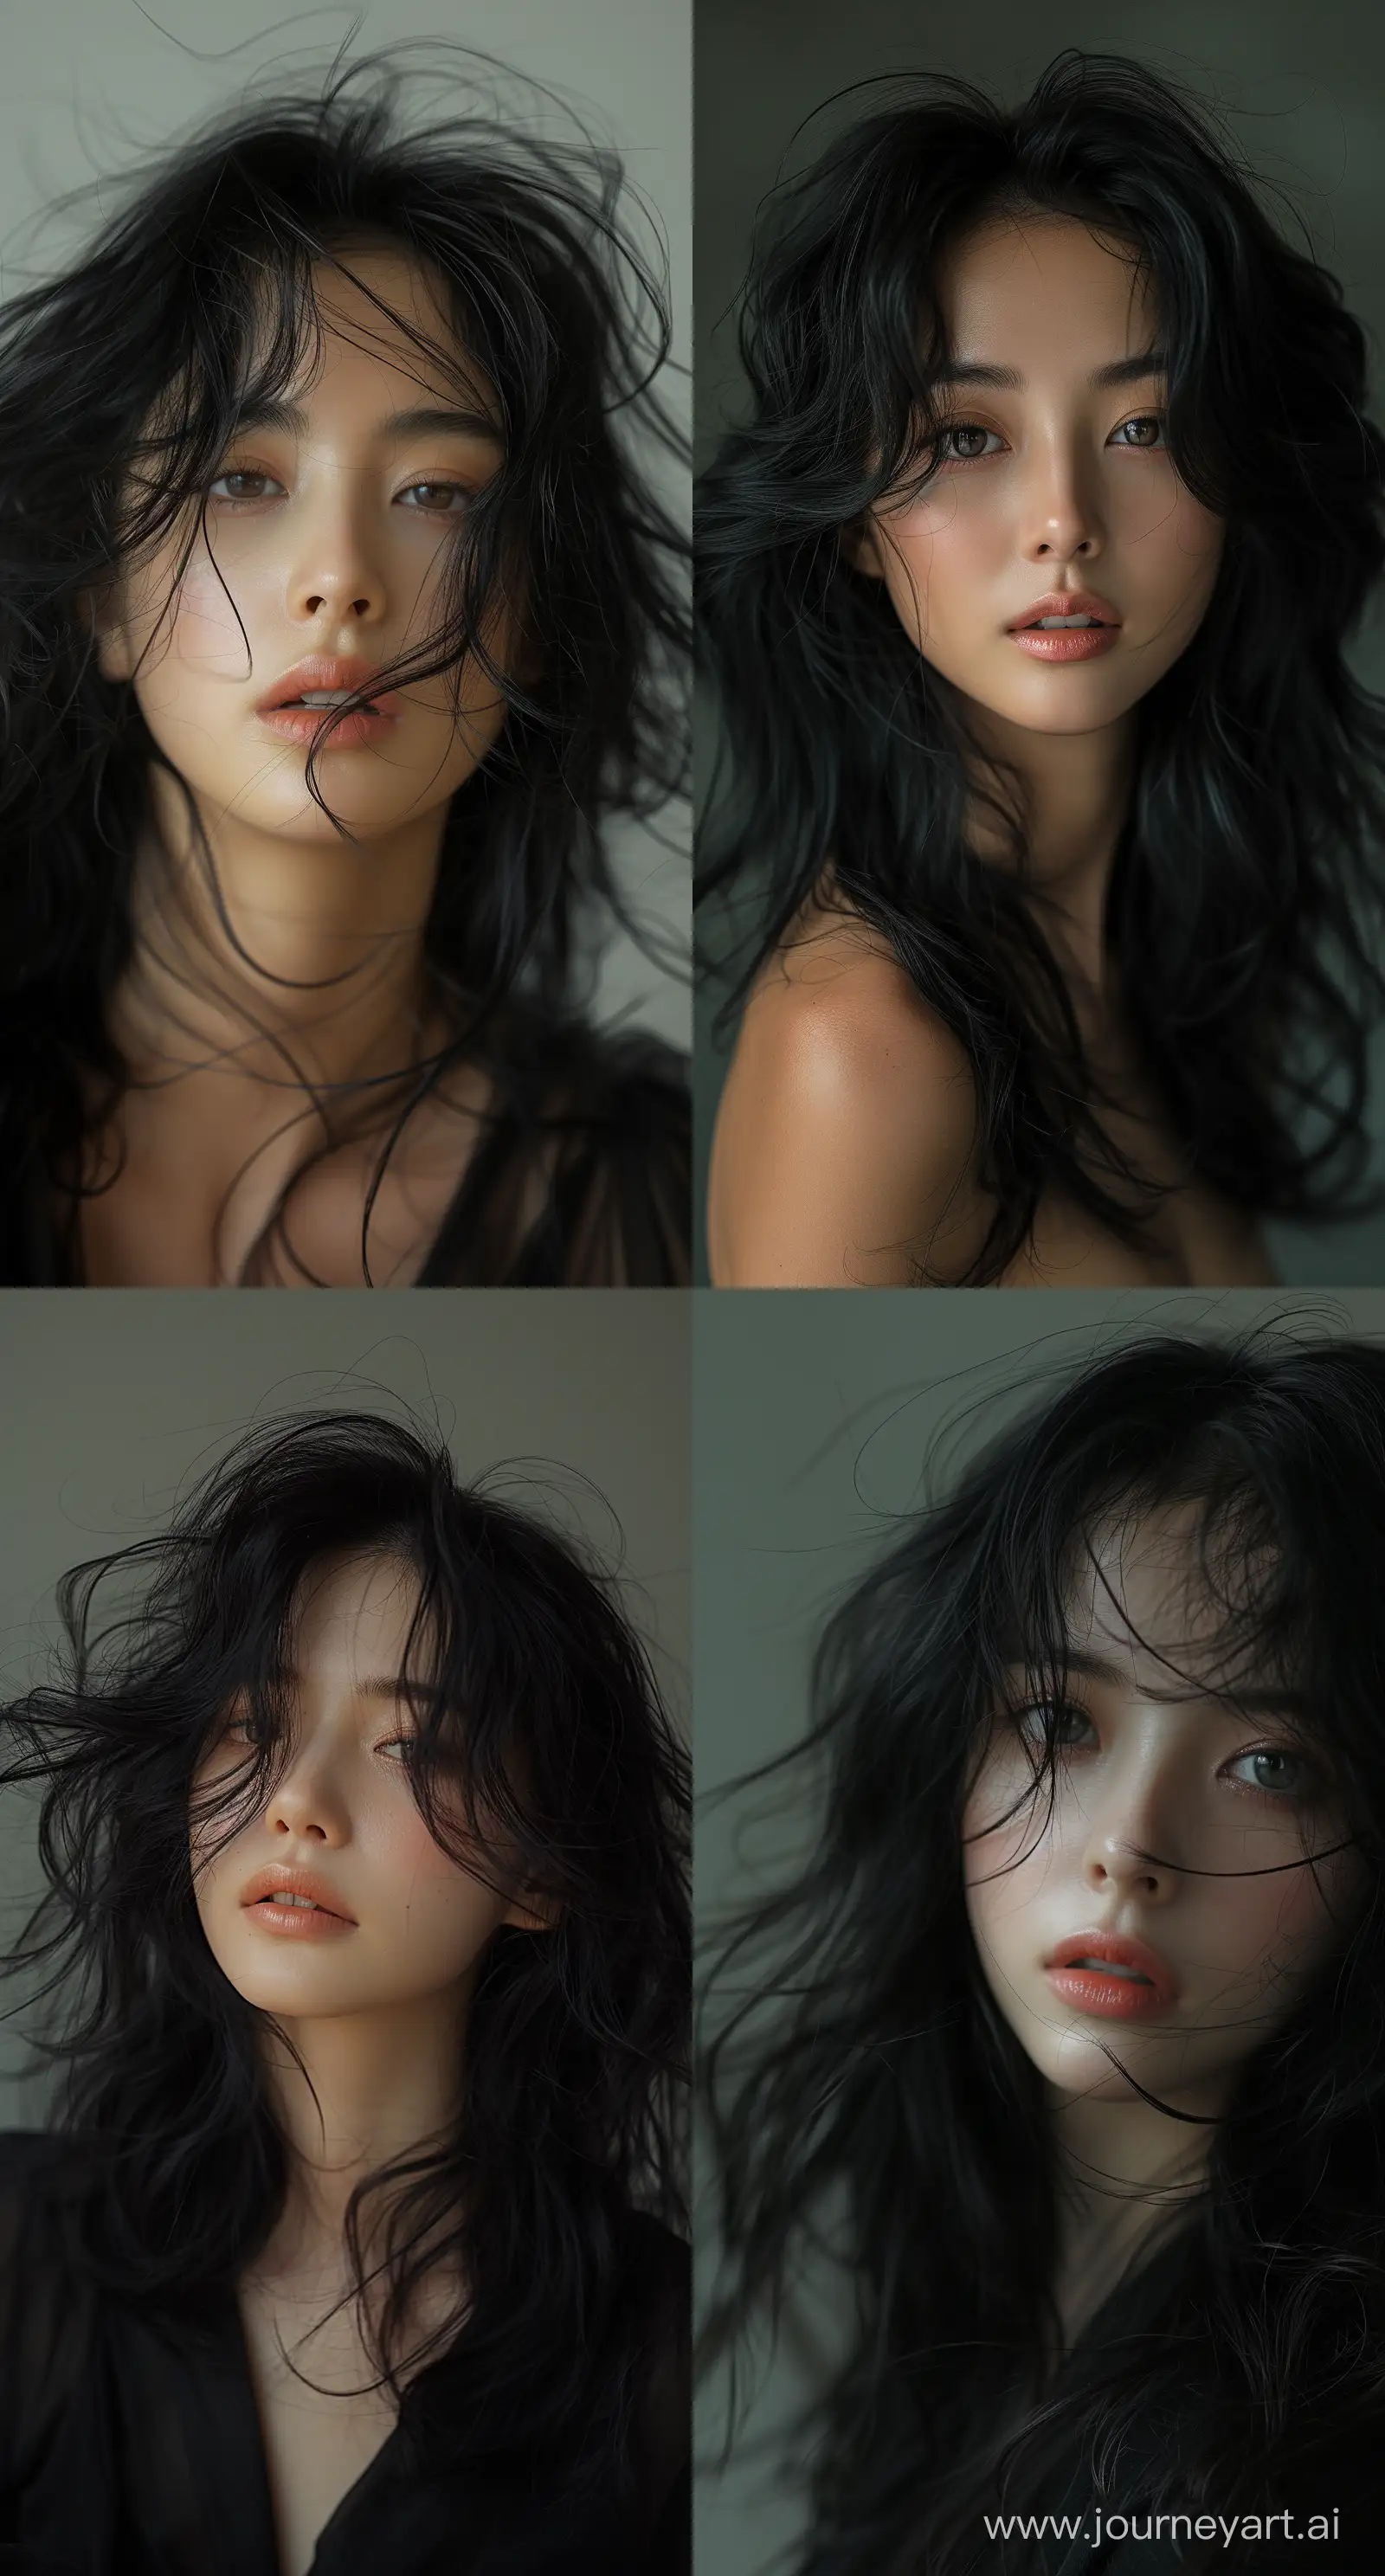 Captivating-Dain-Yoon-Style-Portrait-Emotive-Woman-with-Flowing-Black-Hair